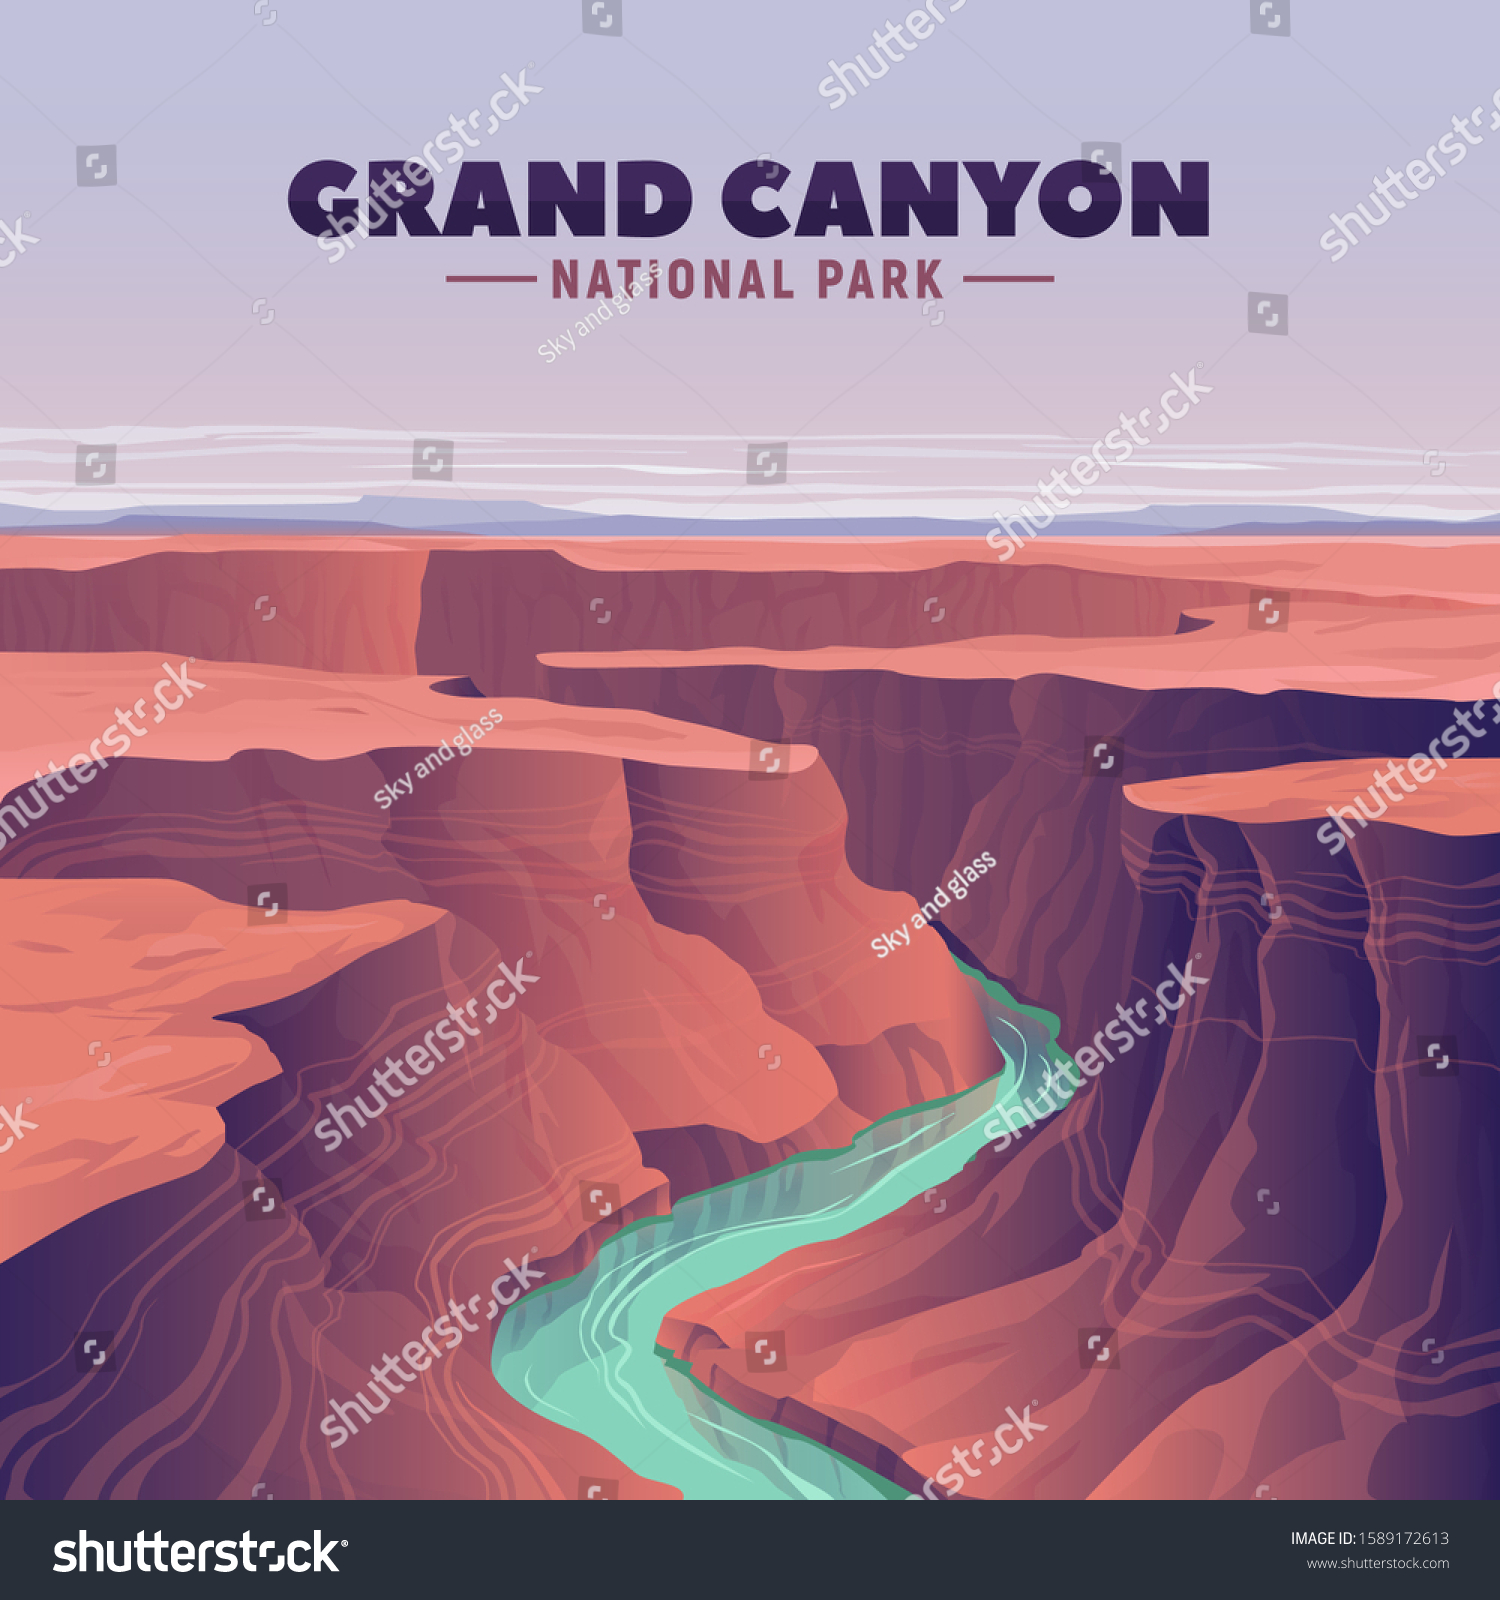 Grand Canyon and Colorado river. Vector illustration. United States landmarks.